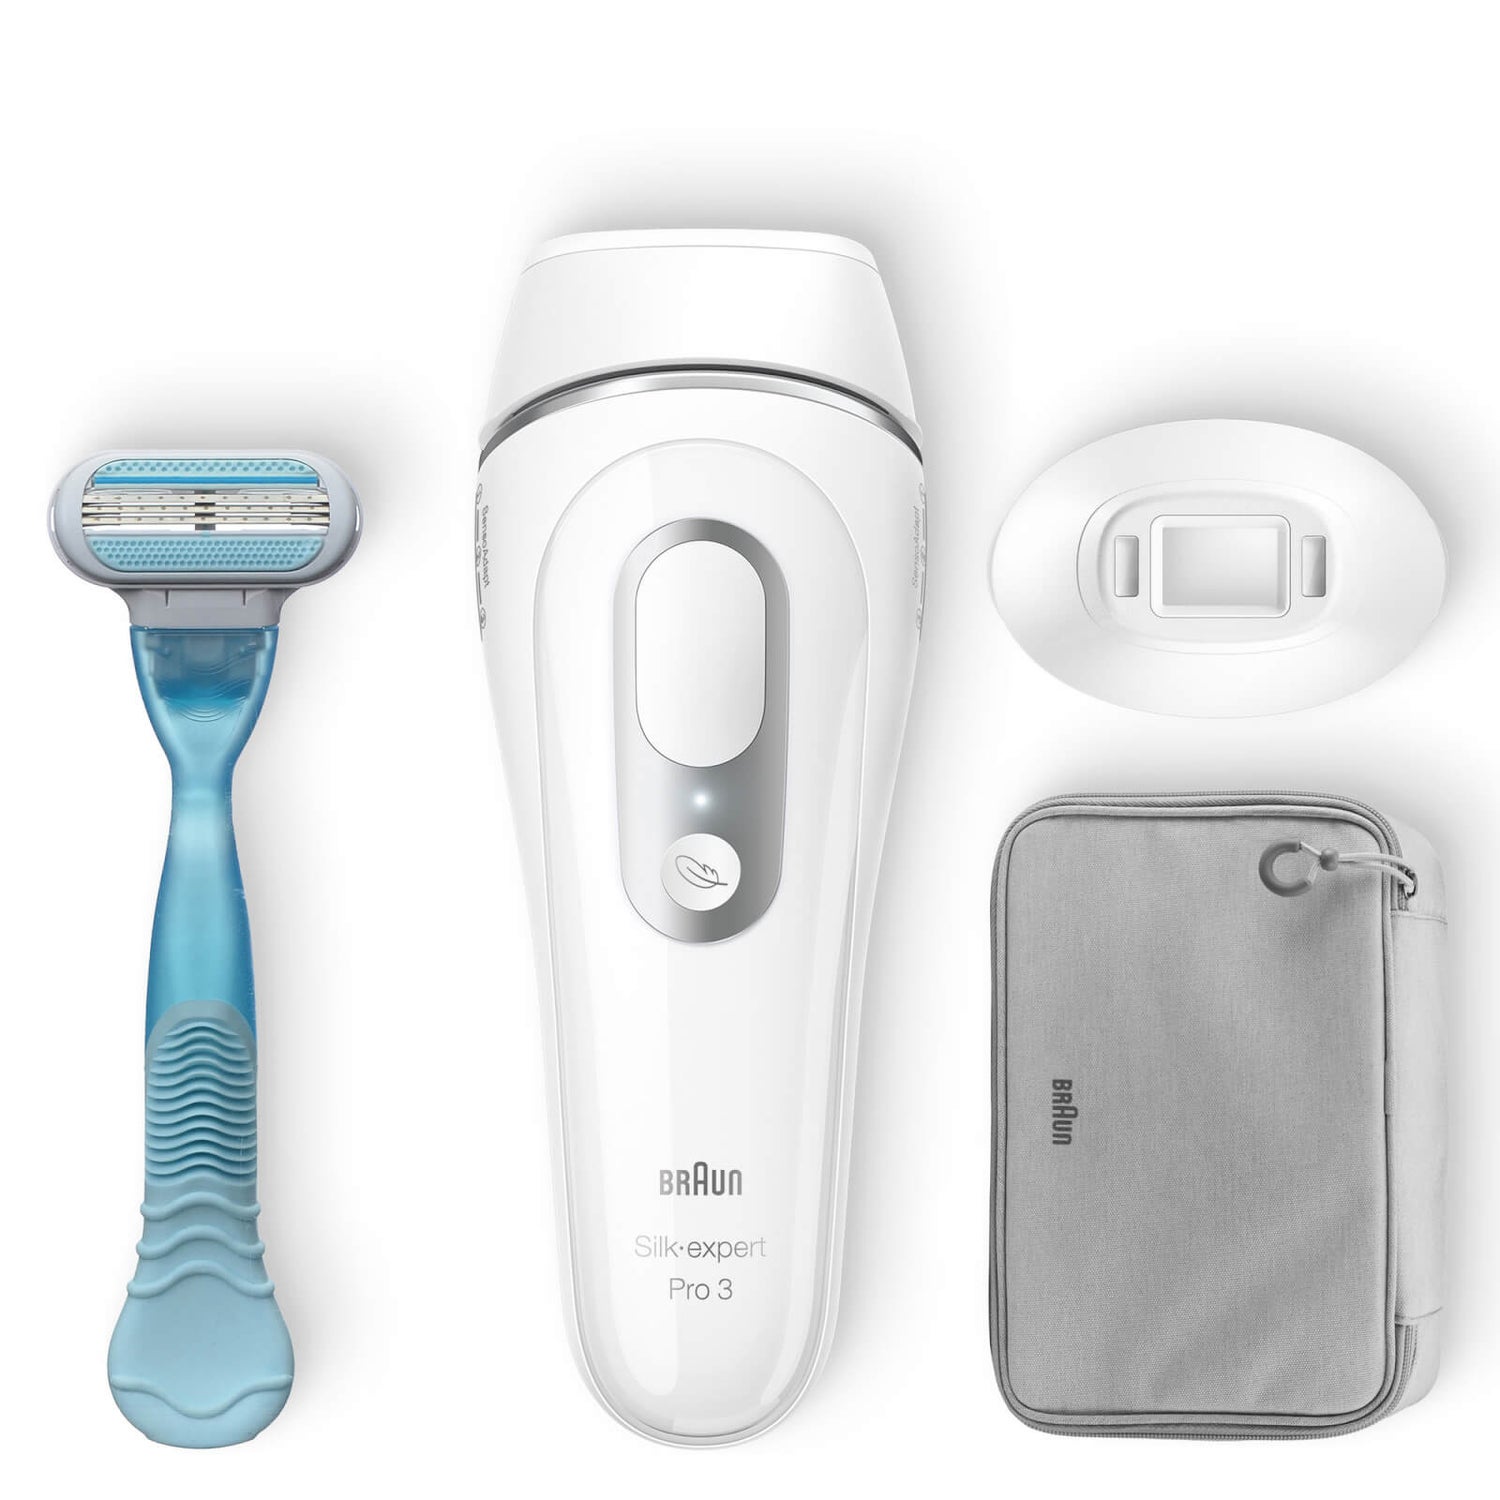 Braun Silk·expert Pro 3 PL3121 Women’s IPL, At-Home Permanent Visible Hair Removal, White/Silver